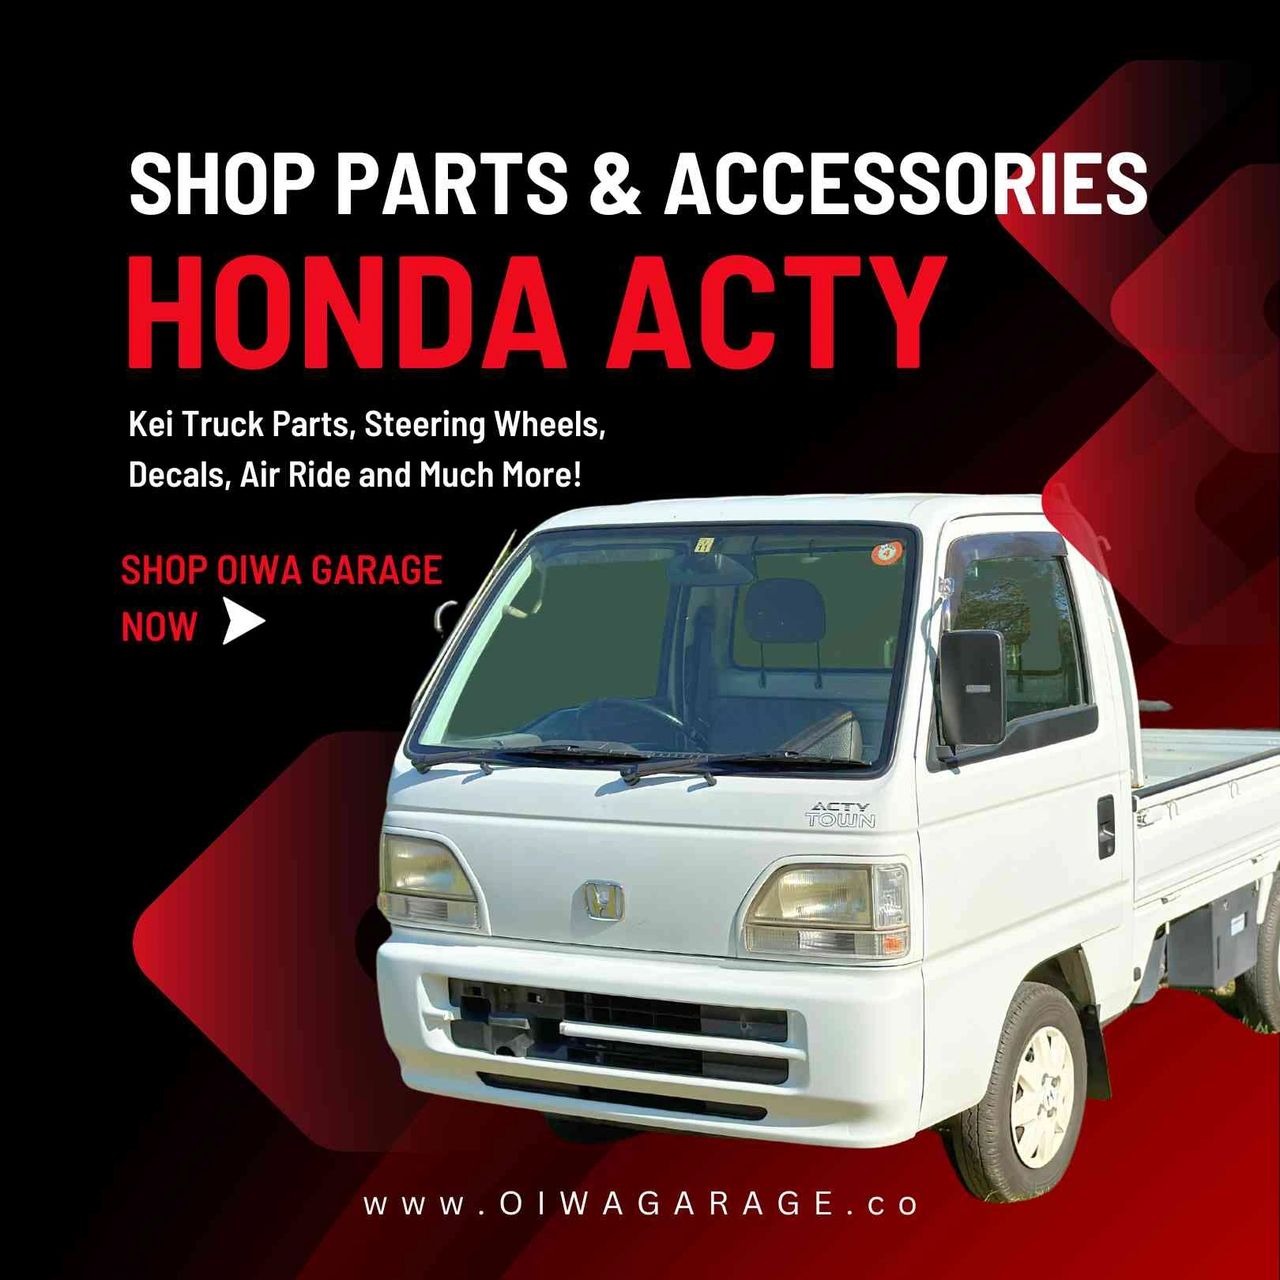 SHOP KEI TRUCK PARTS AND ACCESSORIES OIWAGARAGE.CO